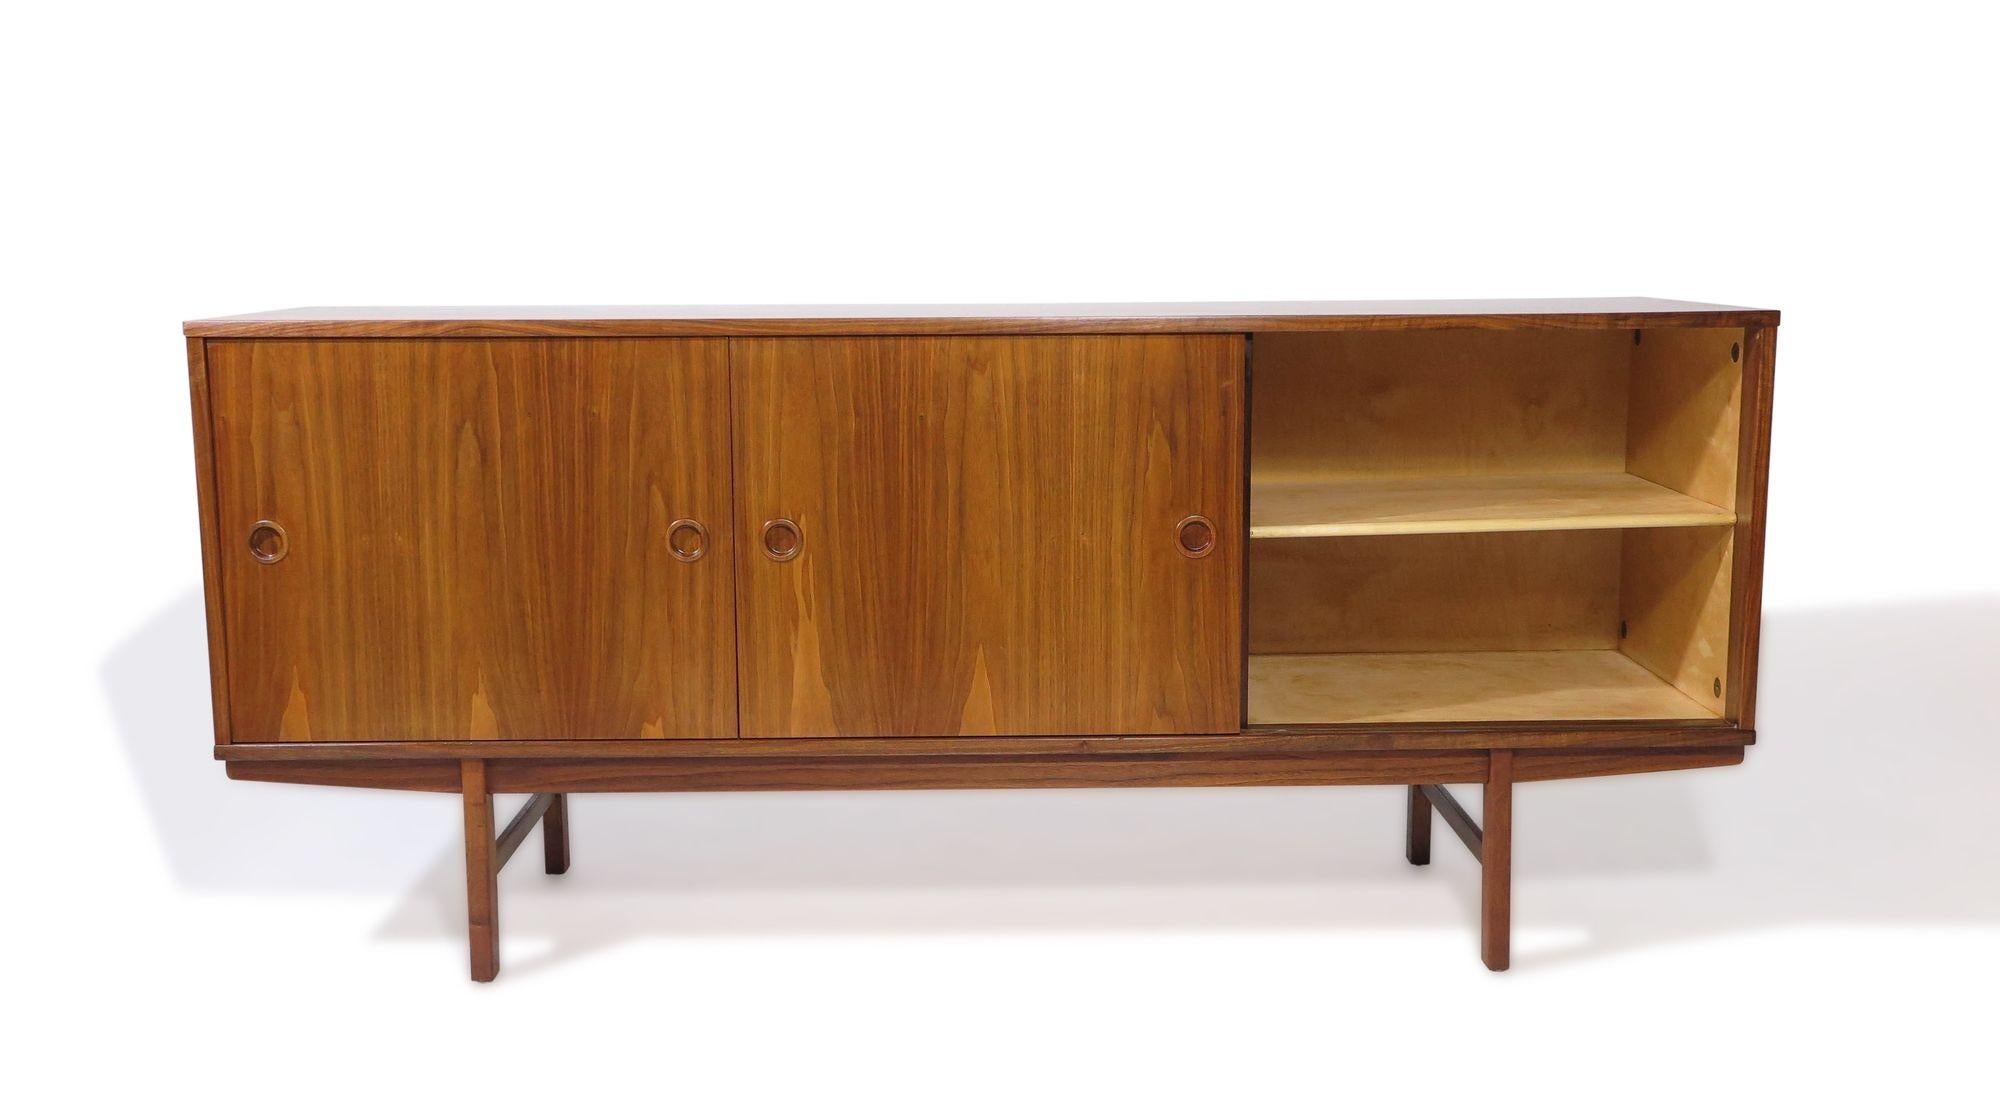 Midcentury Danish walnut credenza with sliding doors and series of five drawers in center, each with book-matched grain and recessed square pulls. The sliding doors open to reveal an interior of beech with adjustable shelves. Raised on squared legs.